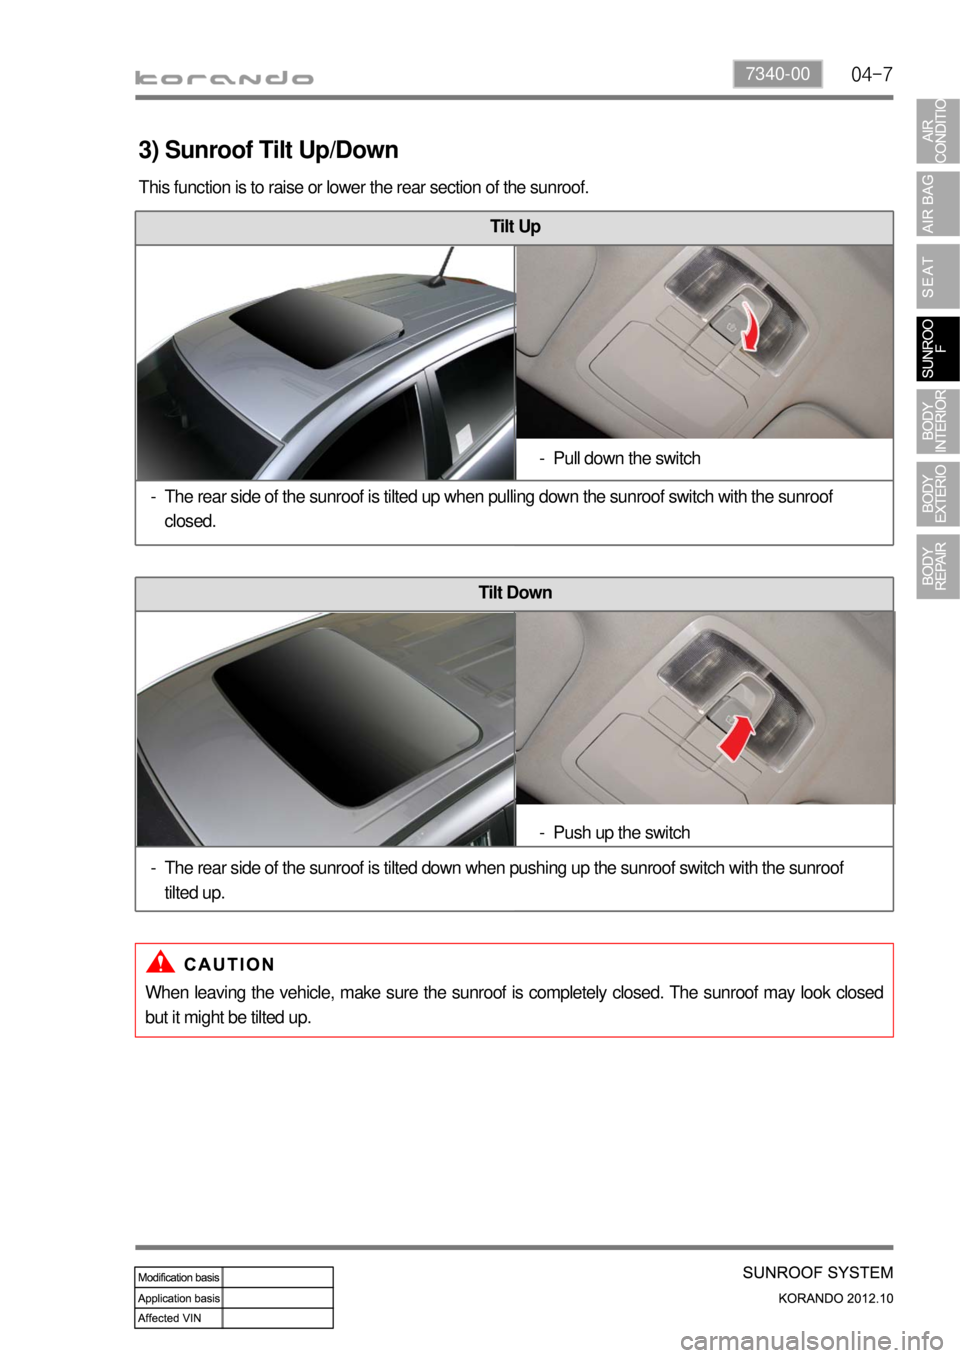 SSANGYONG KORANDO 2012  Service Manual 04-77340-00
3) Sunroof Tilt Up/Down
This function is to raise or lower the rear section of the sunroof.
When leaving the vehicle, make sure the sunroof is completely closed. The sunroof may look close